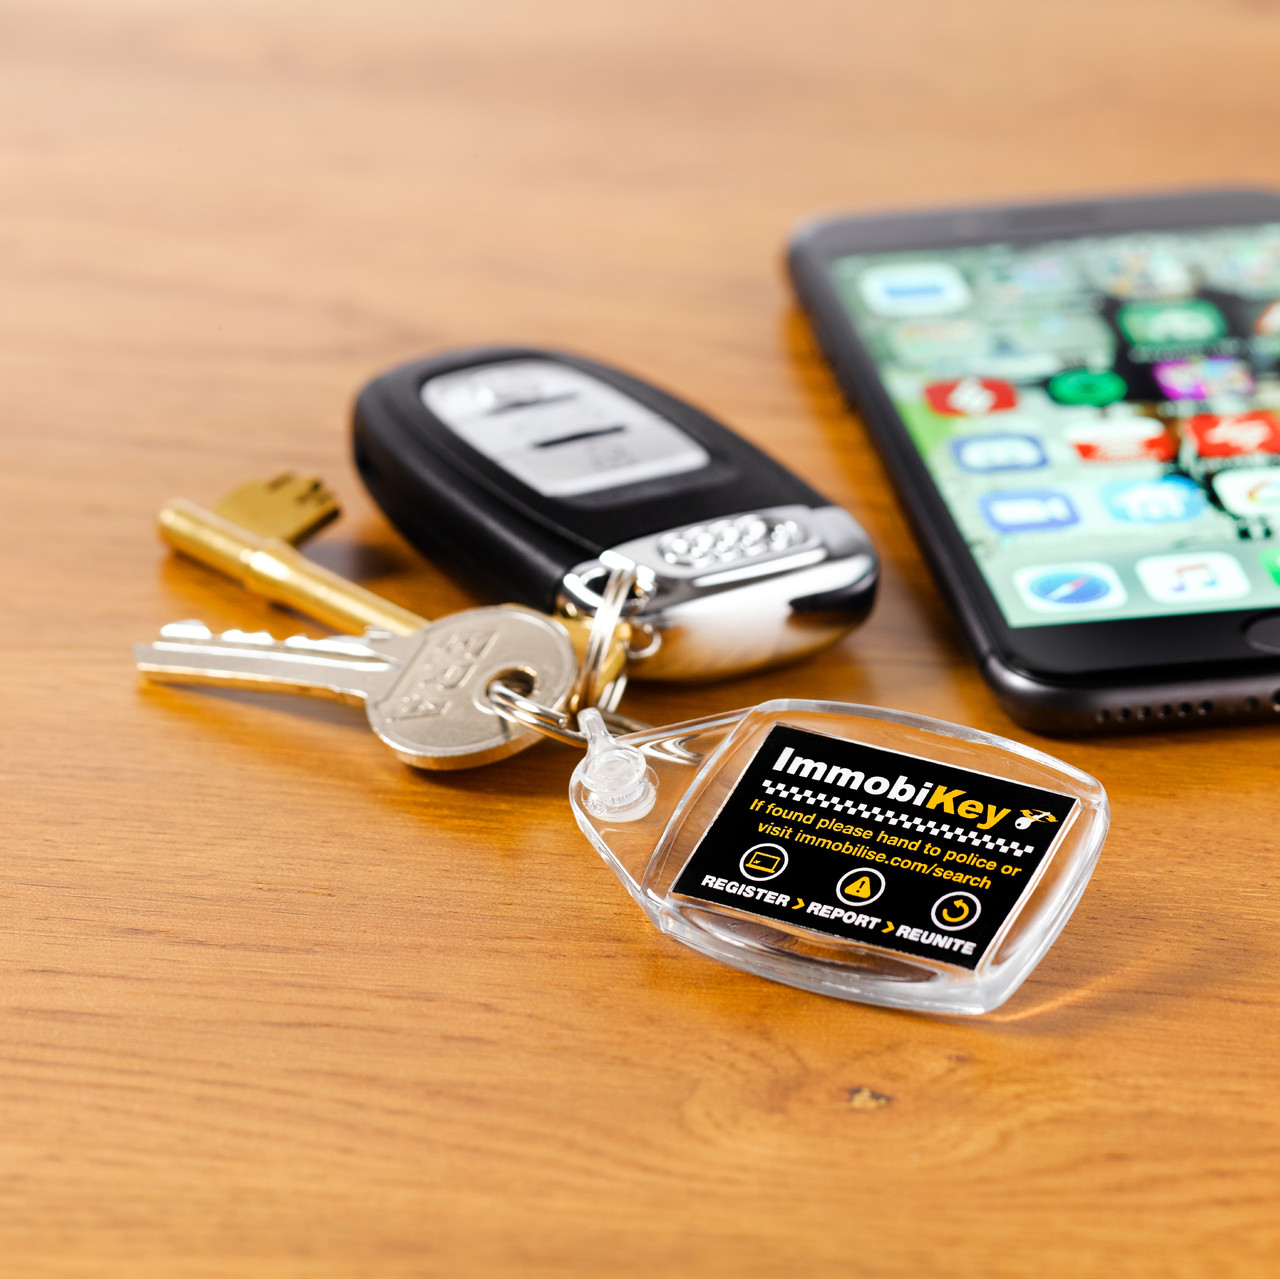 Never Lose Your Keys Again with These Convenient Key Finders